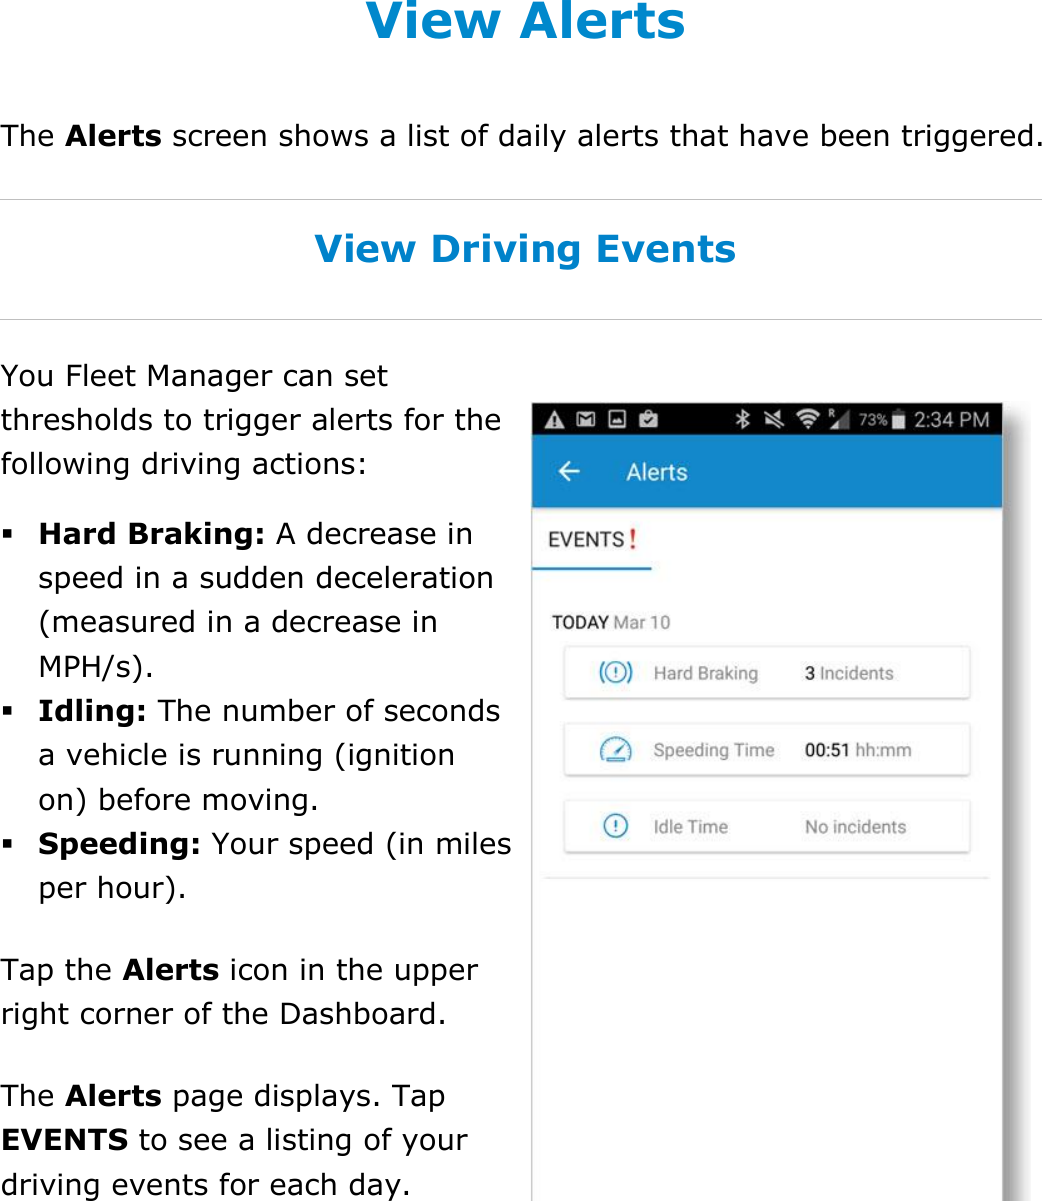  DriverConnect User Guide  81 © 2017, Rand McNally, Inc. View Alerts The Alerts screen shows a list of daily alerts that have been triggered.  View Driving Events You Fleet Manager can set thresholds to trigger alerts for the following driving actions:  Hard Braking: A decrease in speed in a sudden deceleration (measured in a decrease in MPH/s).  Idling: The number of seconds a vehicle is running (ignition on) before moving.  Speeding: Your speed (in miles per hour). Tap the Alerts icon in the upper right corner of the Dashboard. The Alerts page displays. Tap EVENTS to see a listing of your driving events for each day.   